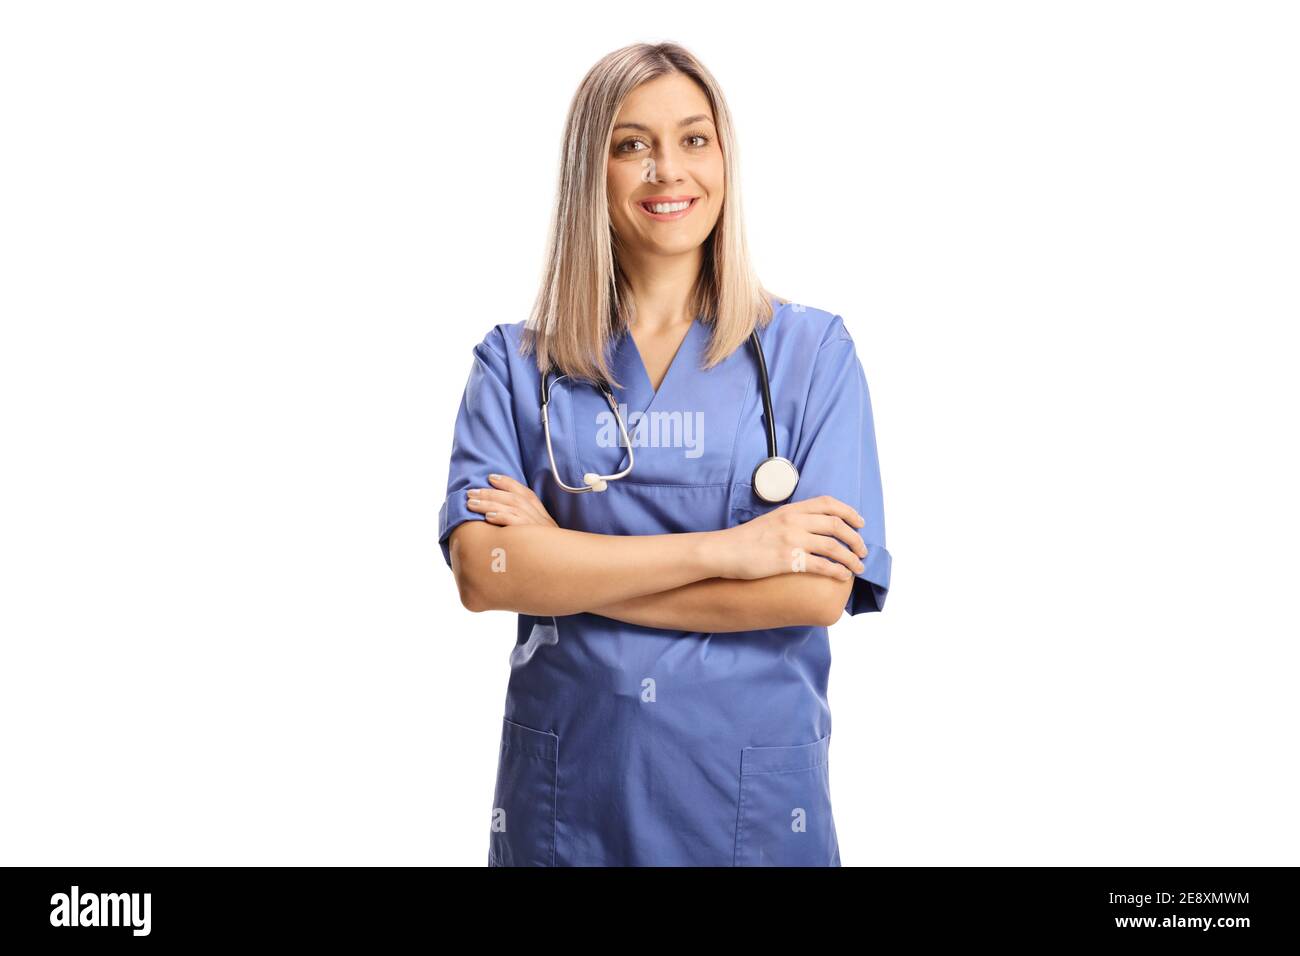 Female health care worker in a blue uniform smiling at camera isolated on white background Stock Photo